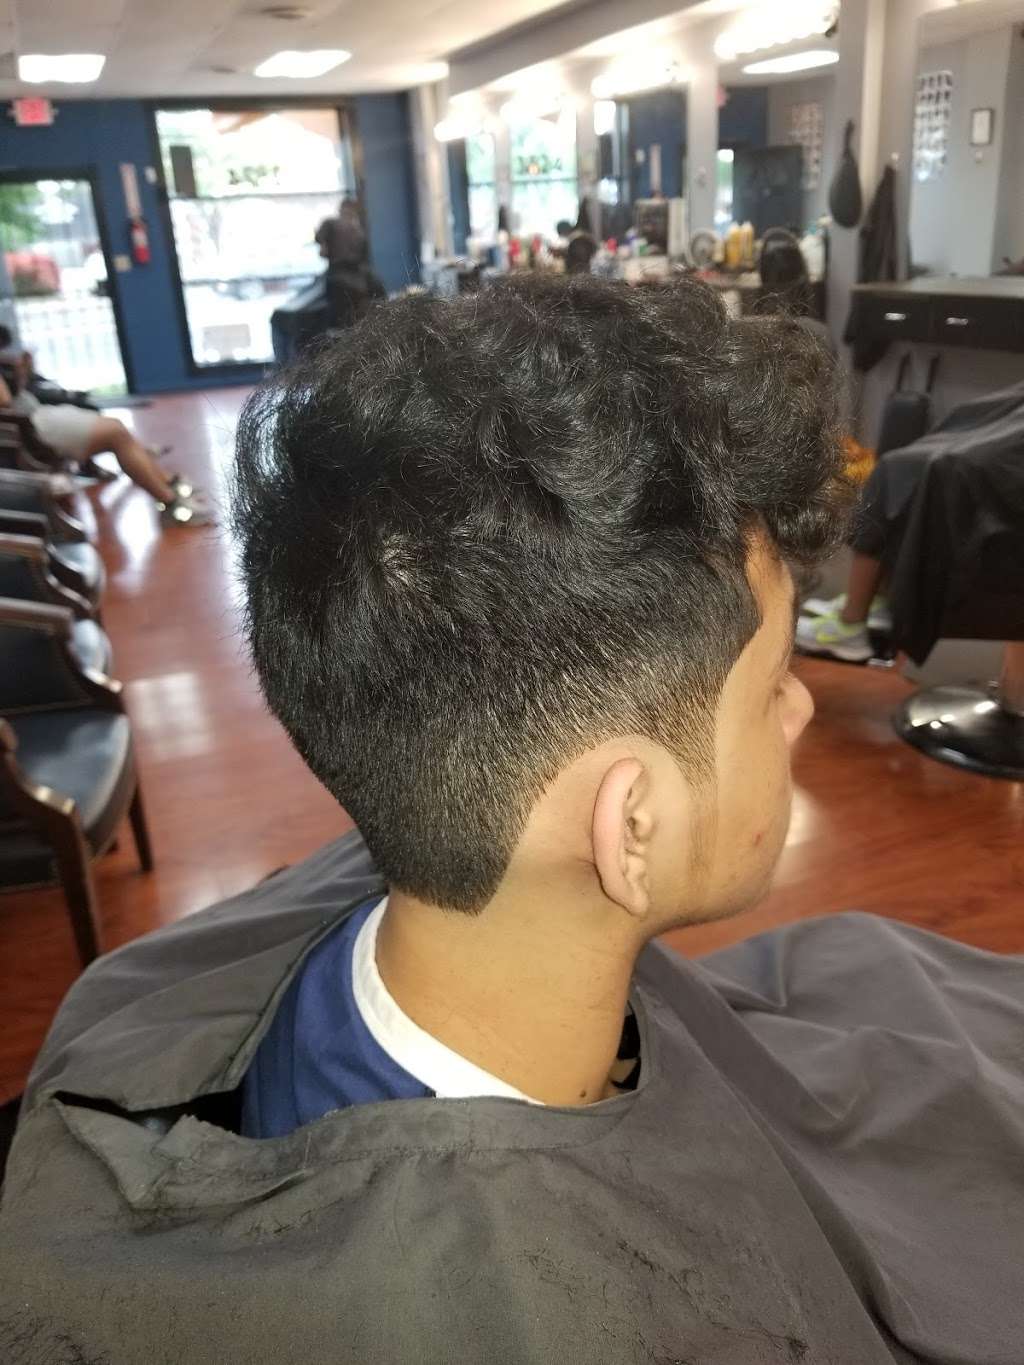 Royal Cuts Gentlemens Grooming - hair care  | Photo 3 of 10 | Address: 3824 Bladensburg Rd, Cottage City, MD 20722, USA | Phone: (240) 714-5505